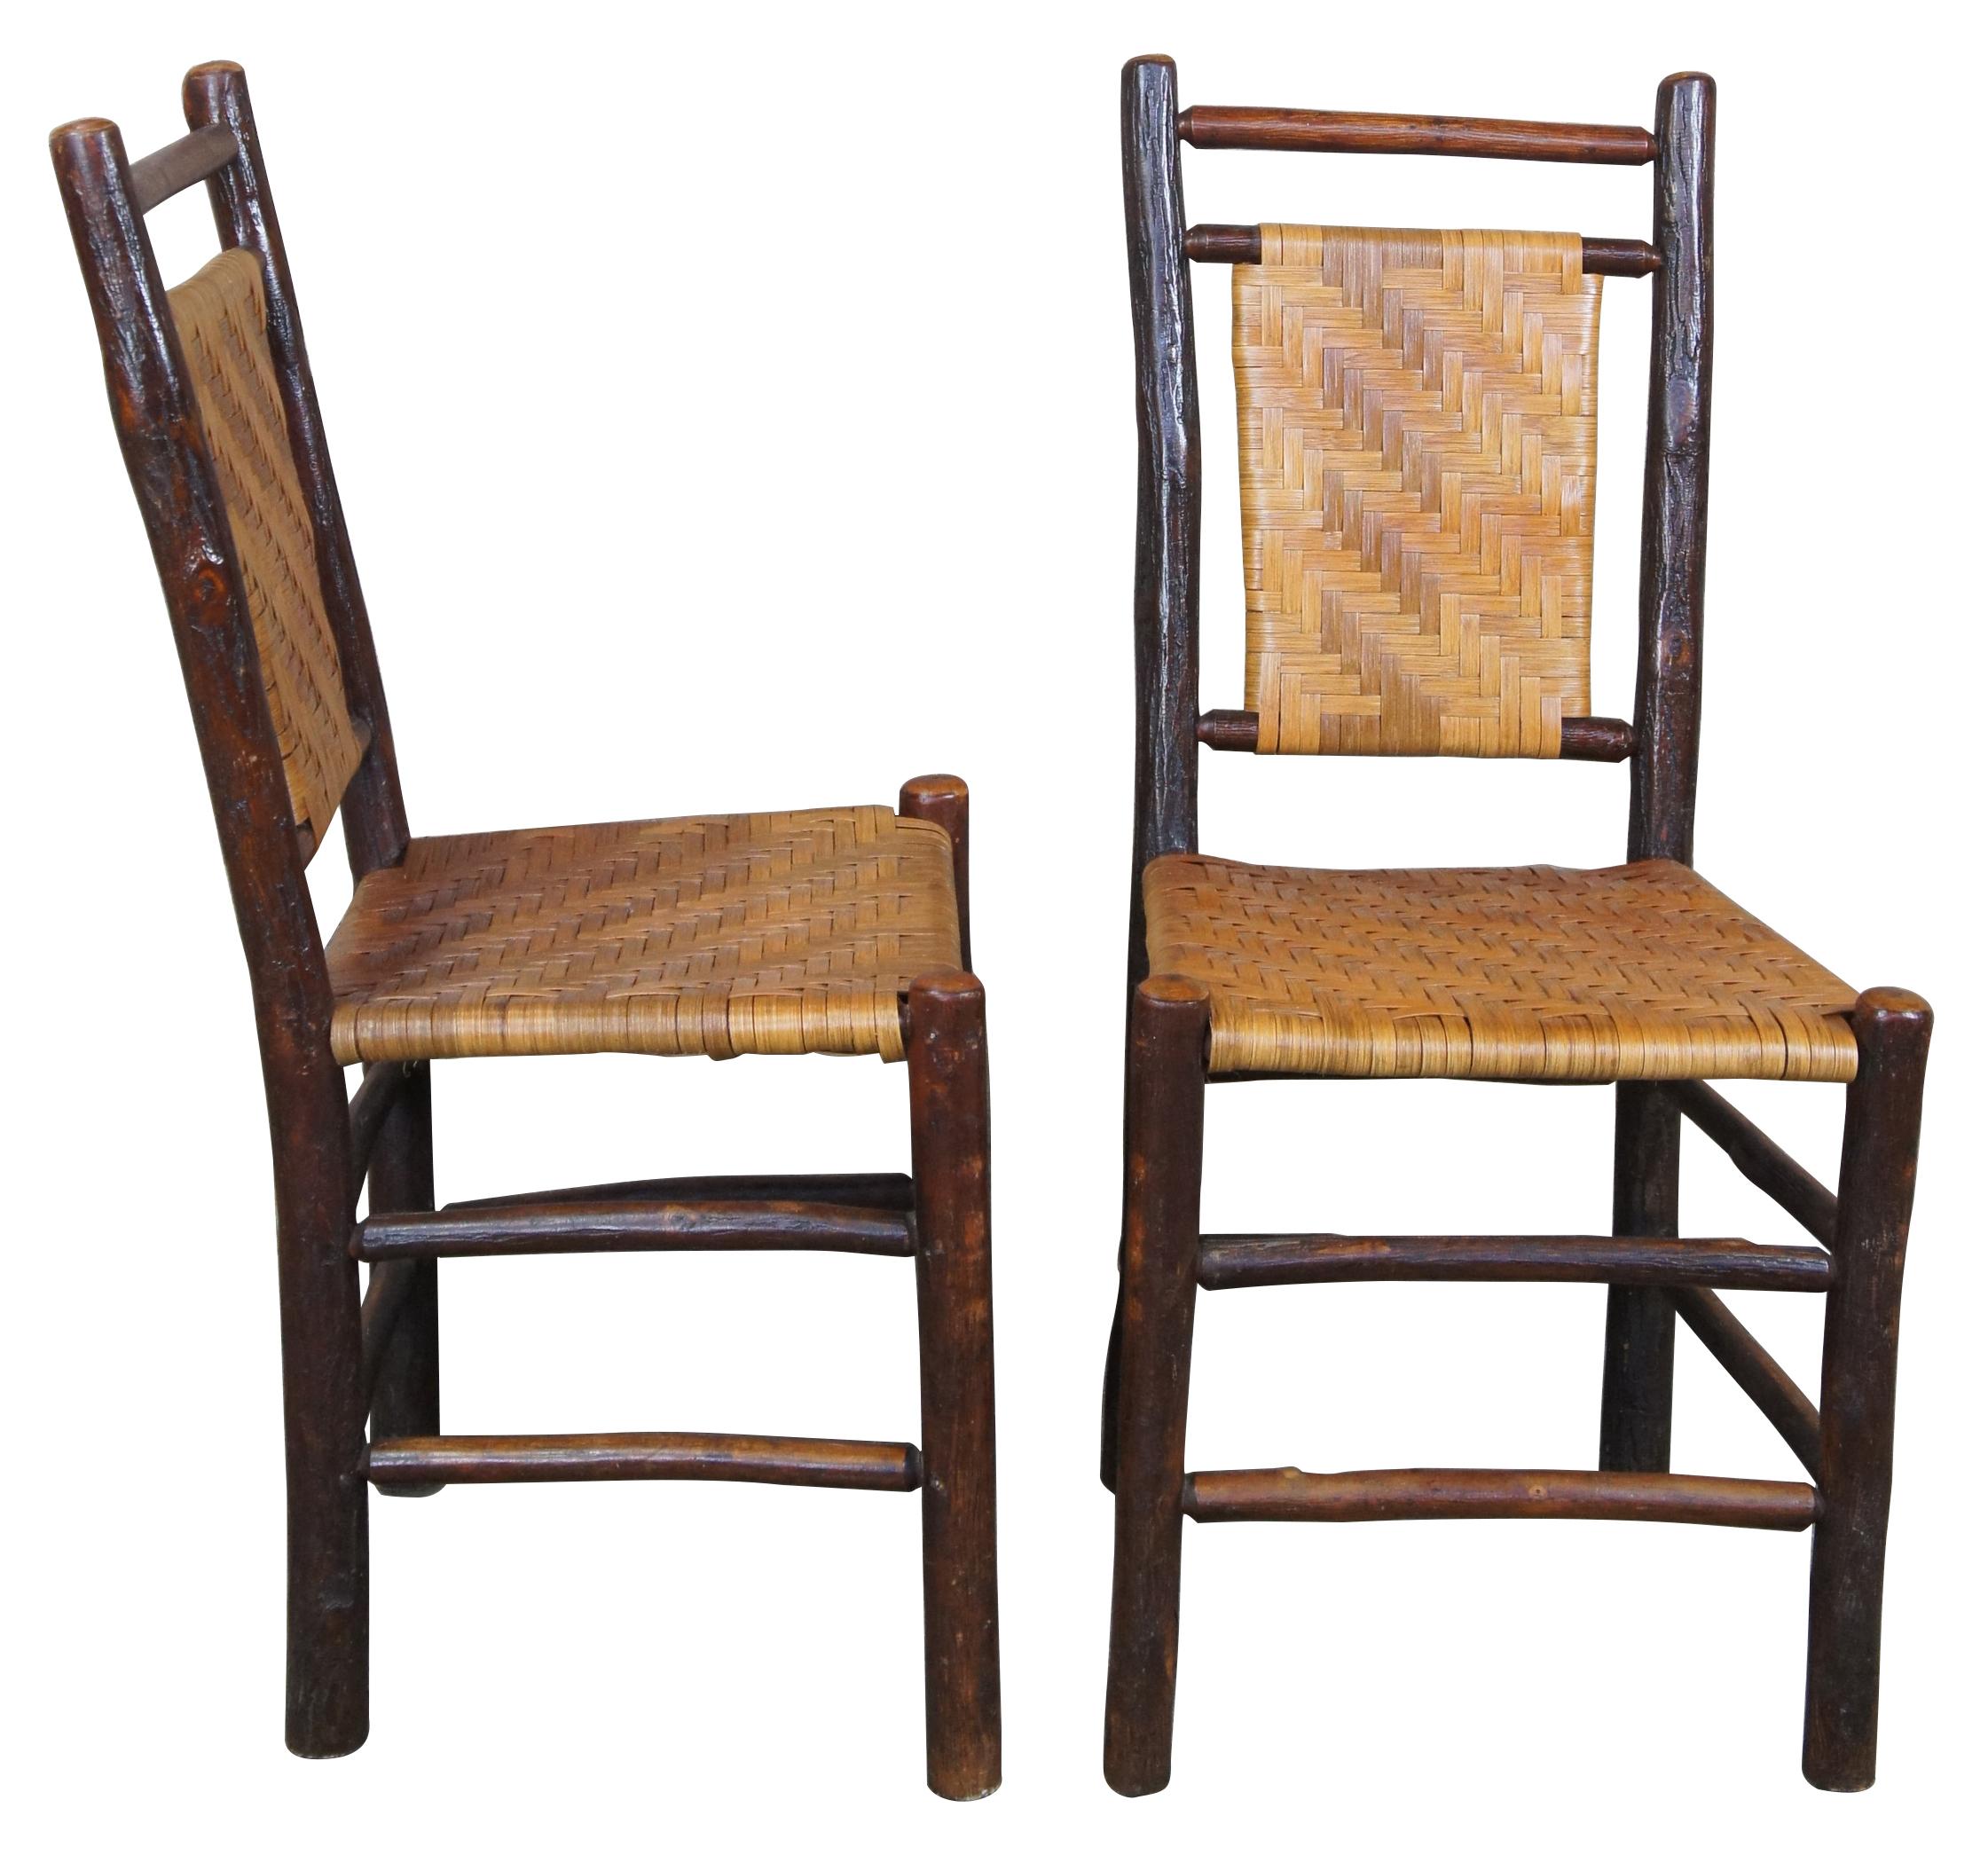 Rustic Hickory Furniture Company Game Table & Chairs No 103 19 Adirondack Lodge 7